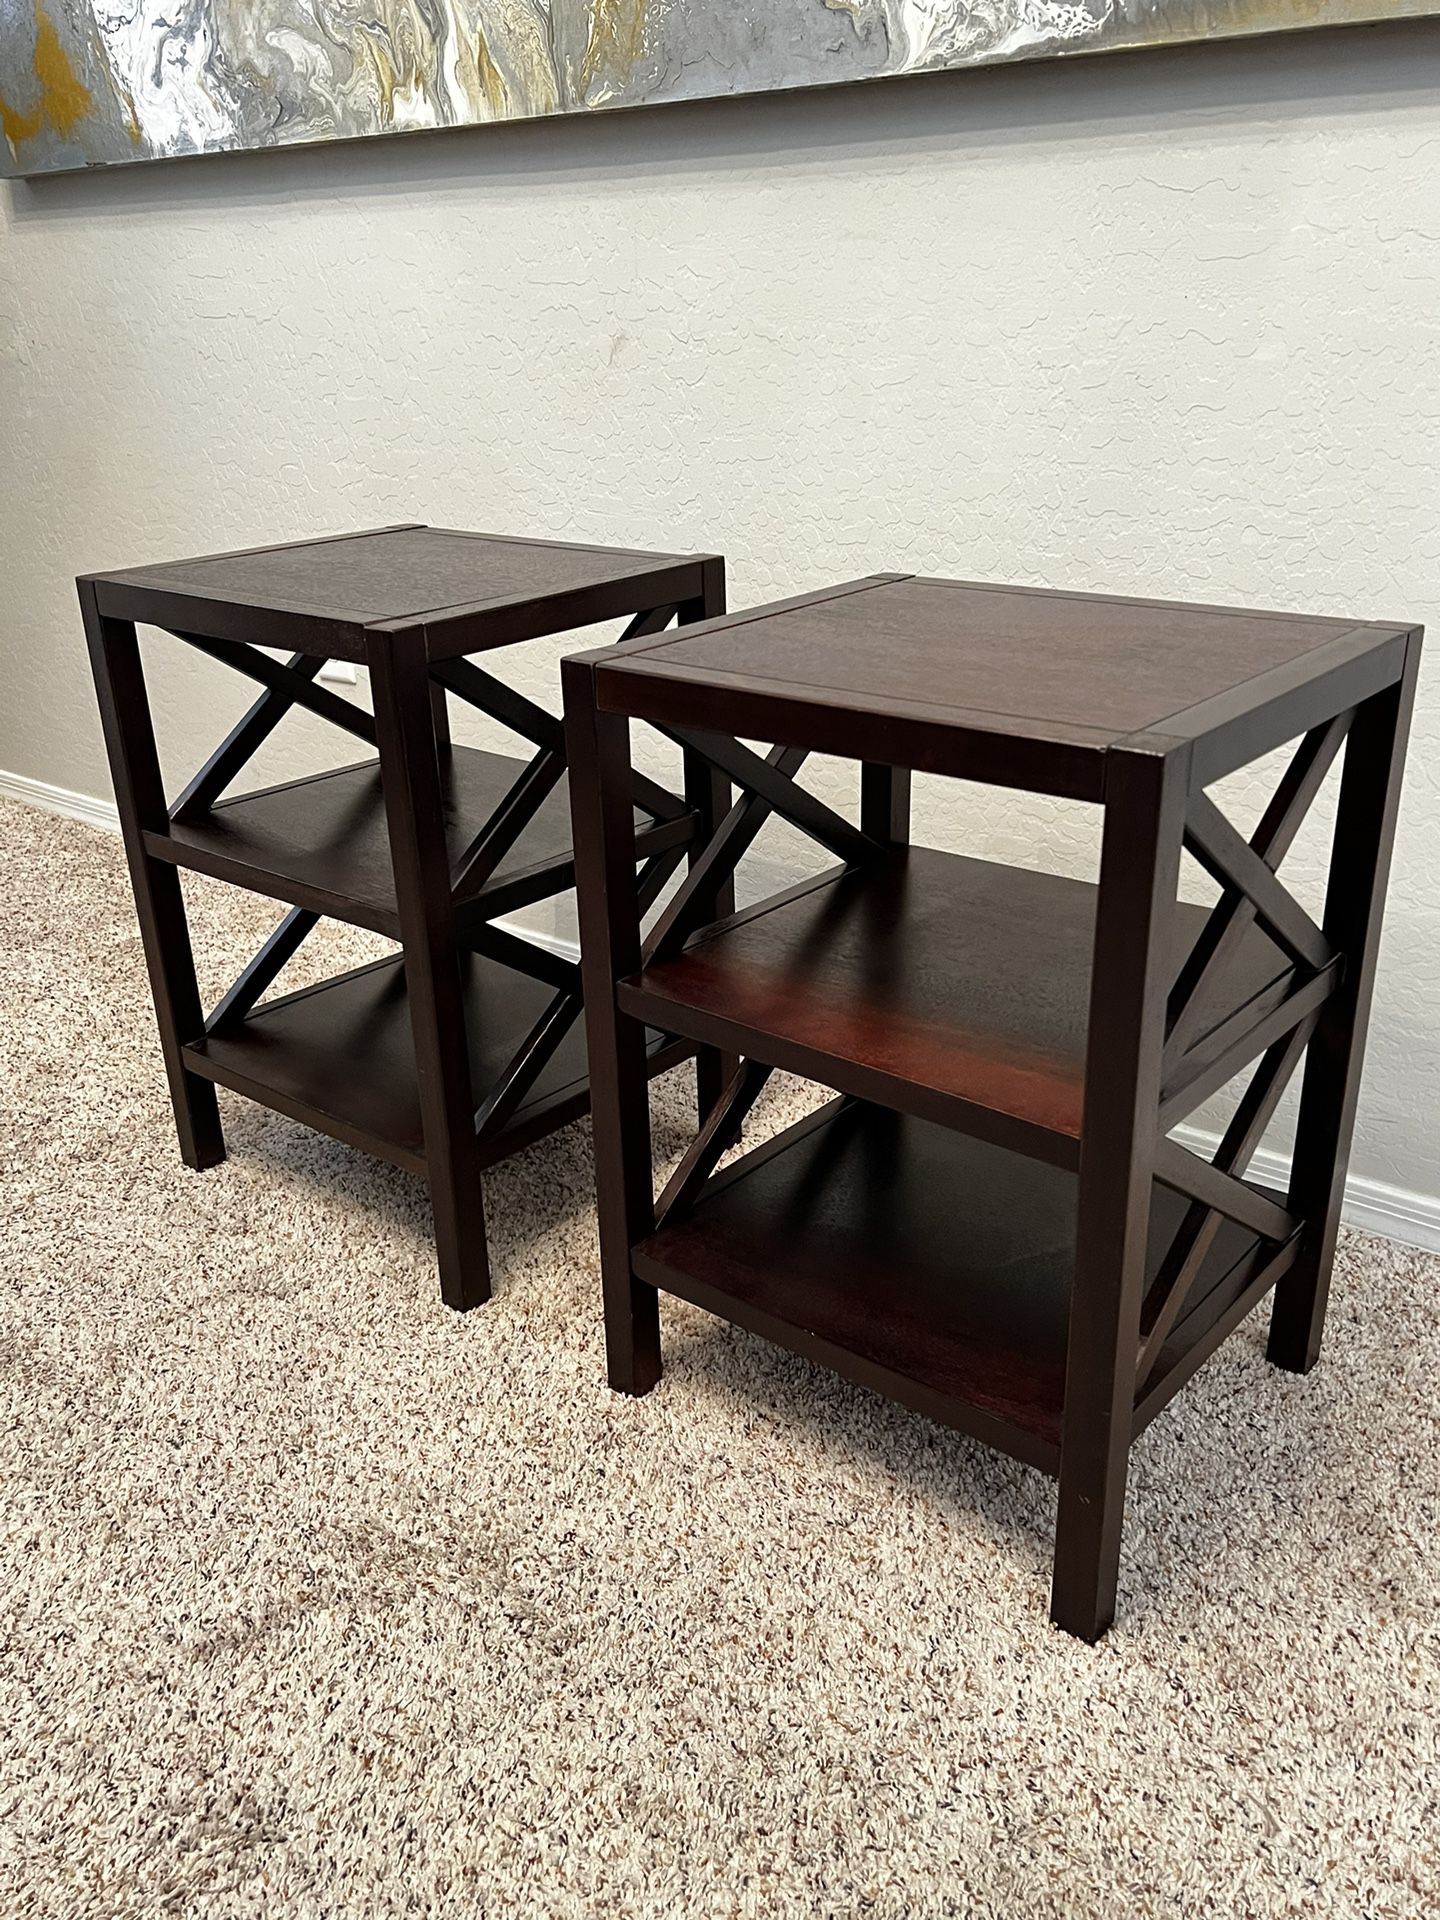 TWO- 3 Tier Espresso Wood End Table with 2 Shelves